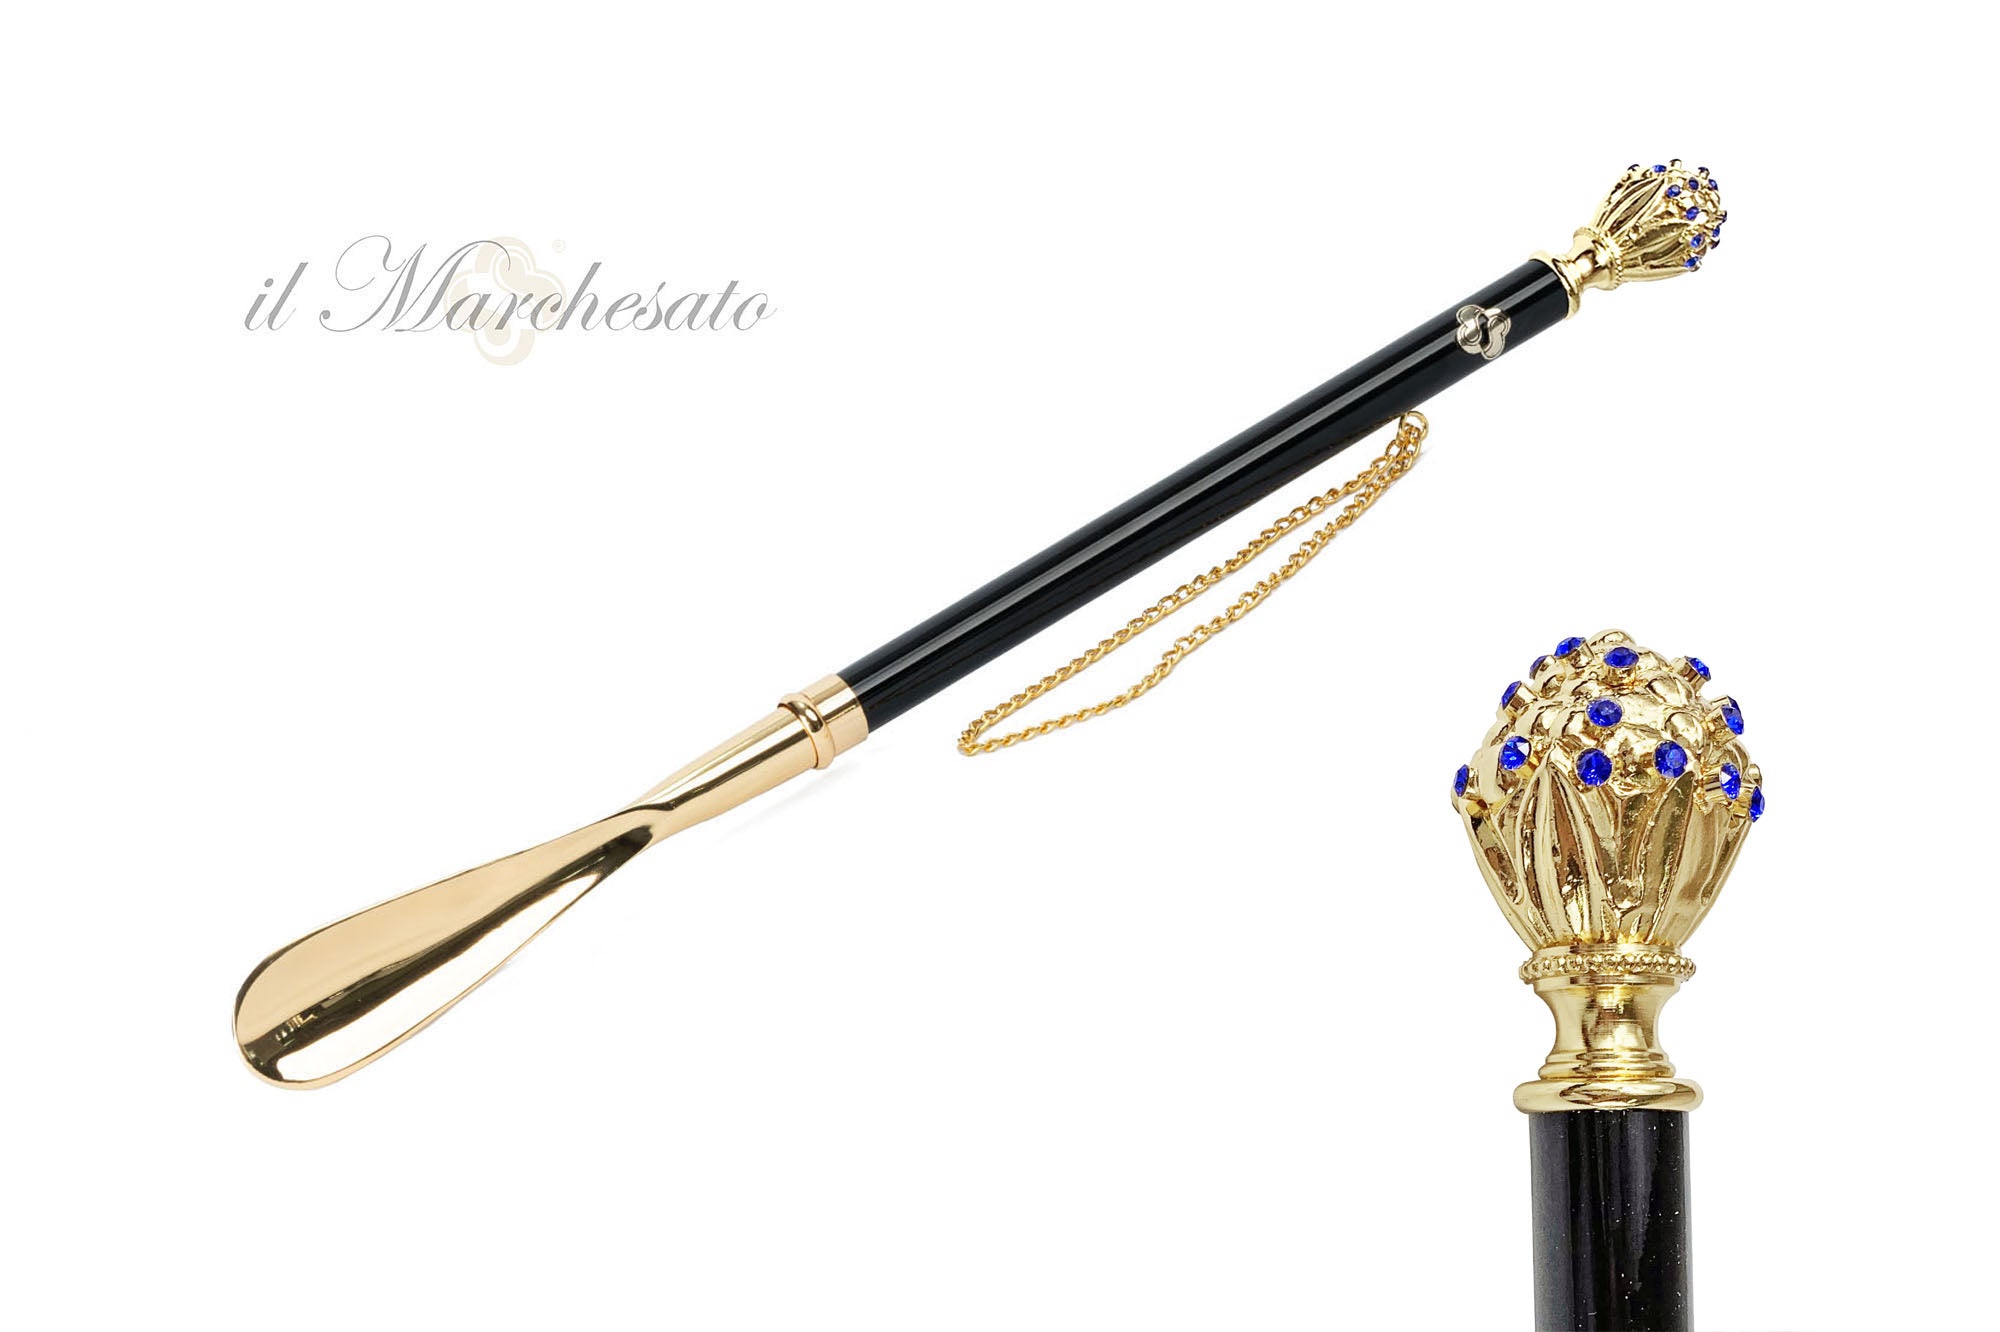 Artisanal Beauty: Luxury Shoehorns with Sapphire Crystals